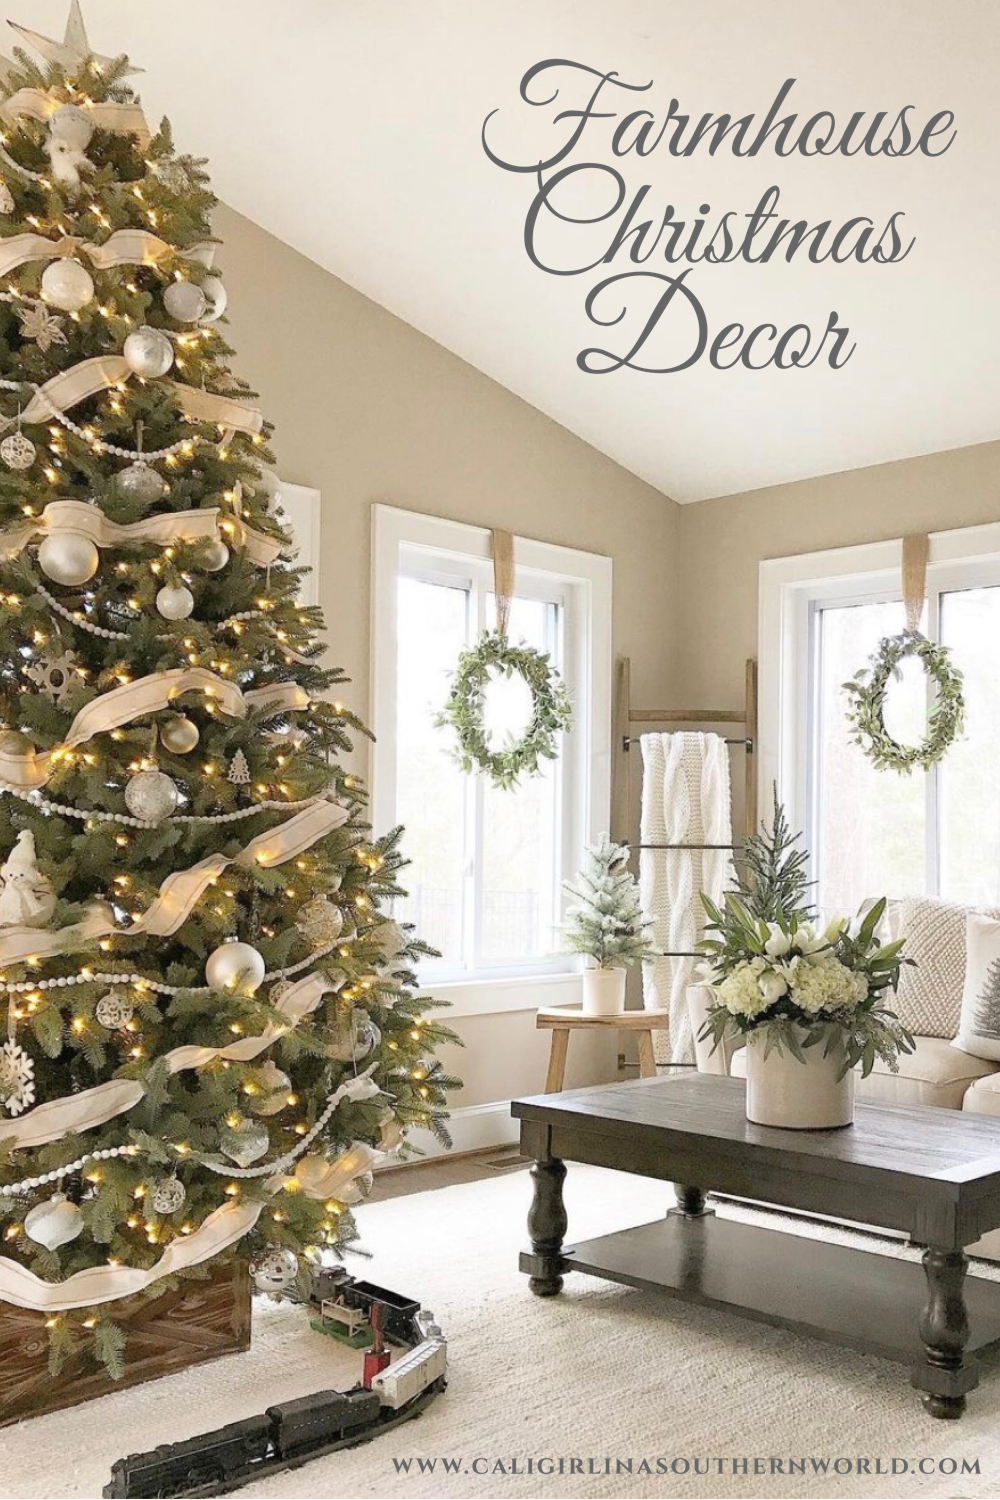 Pinterest Pin for Farmhouse Christmas Decor with a Christmas tree decorated in white.